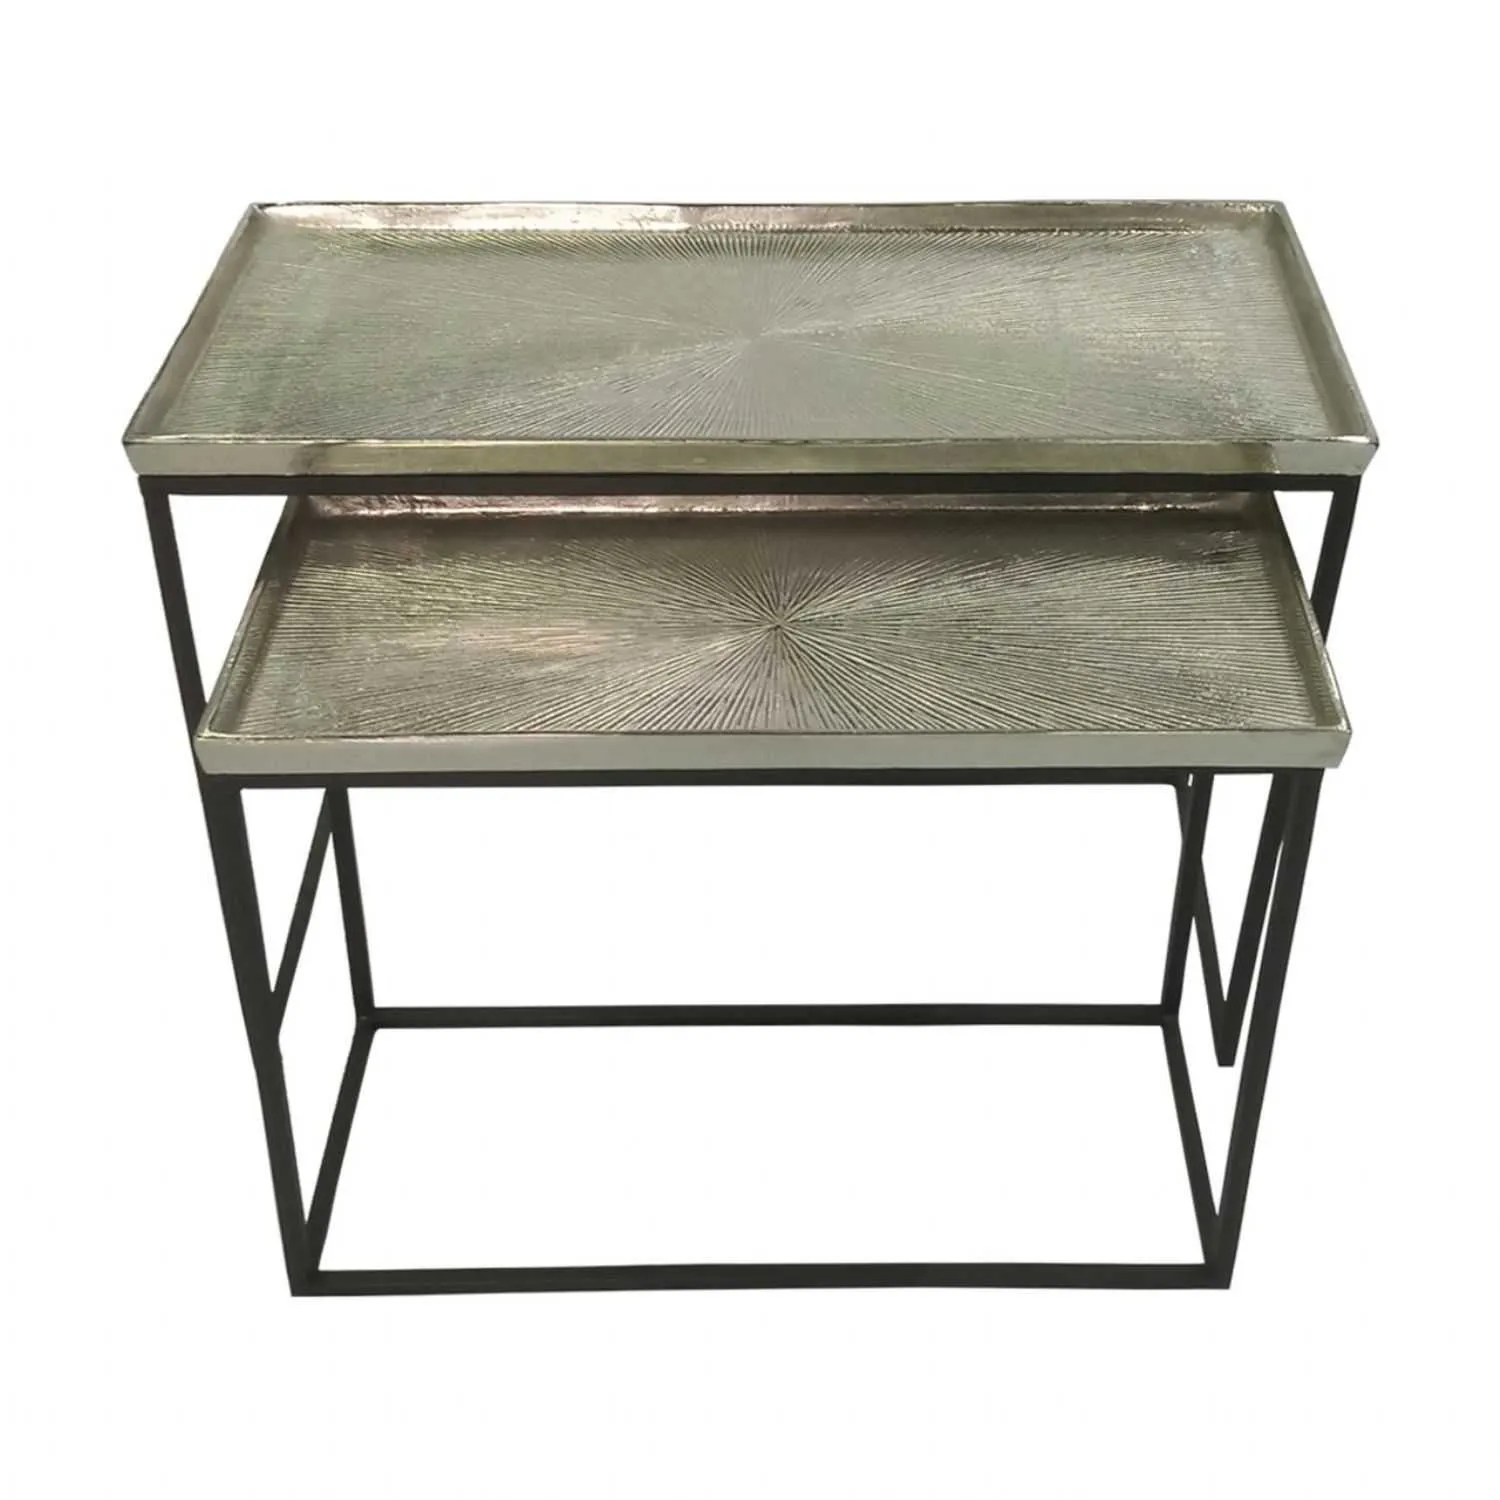 Luxe Kina Set of 2 Black and Nickel Nesting Tables